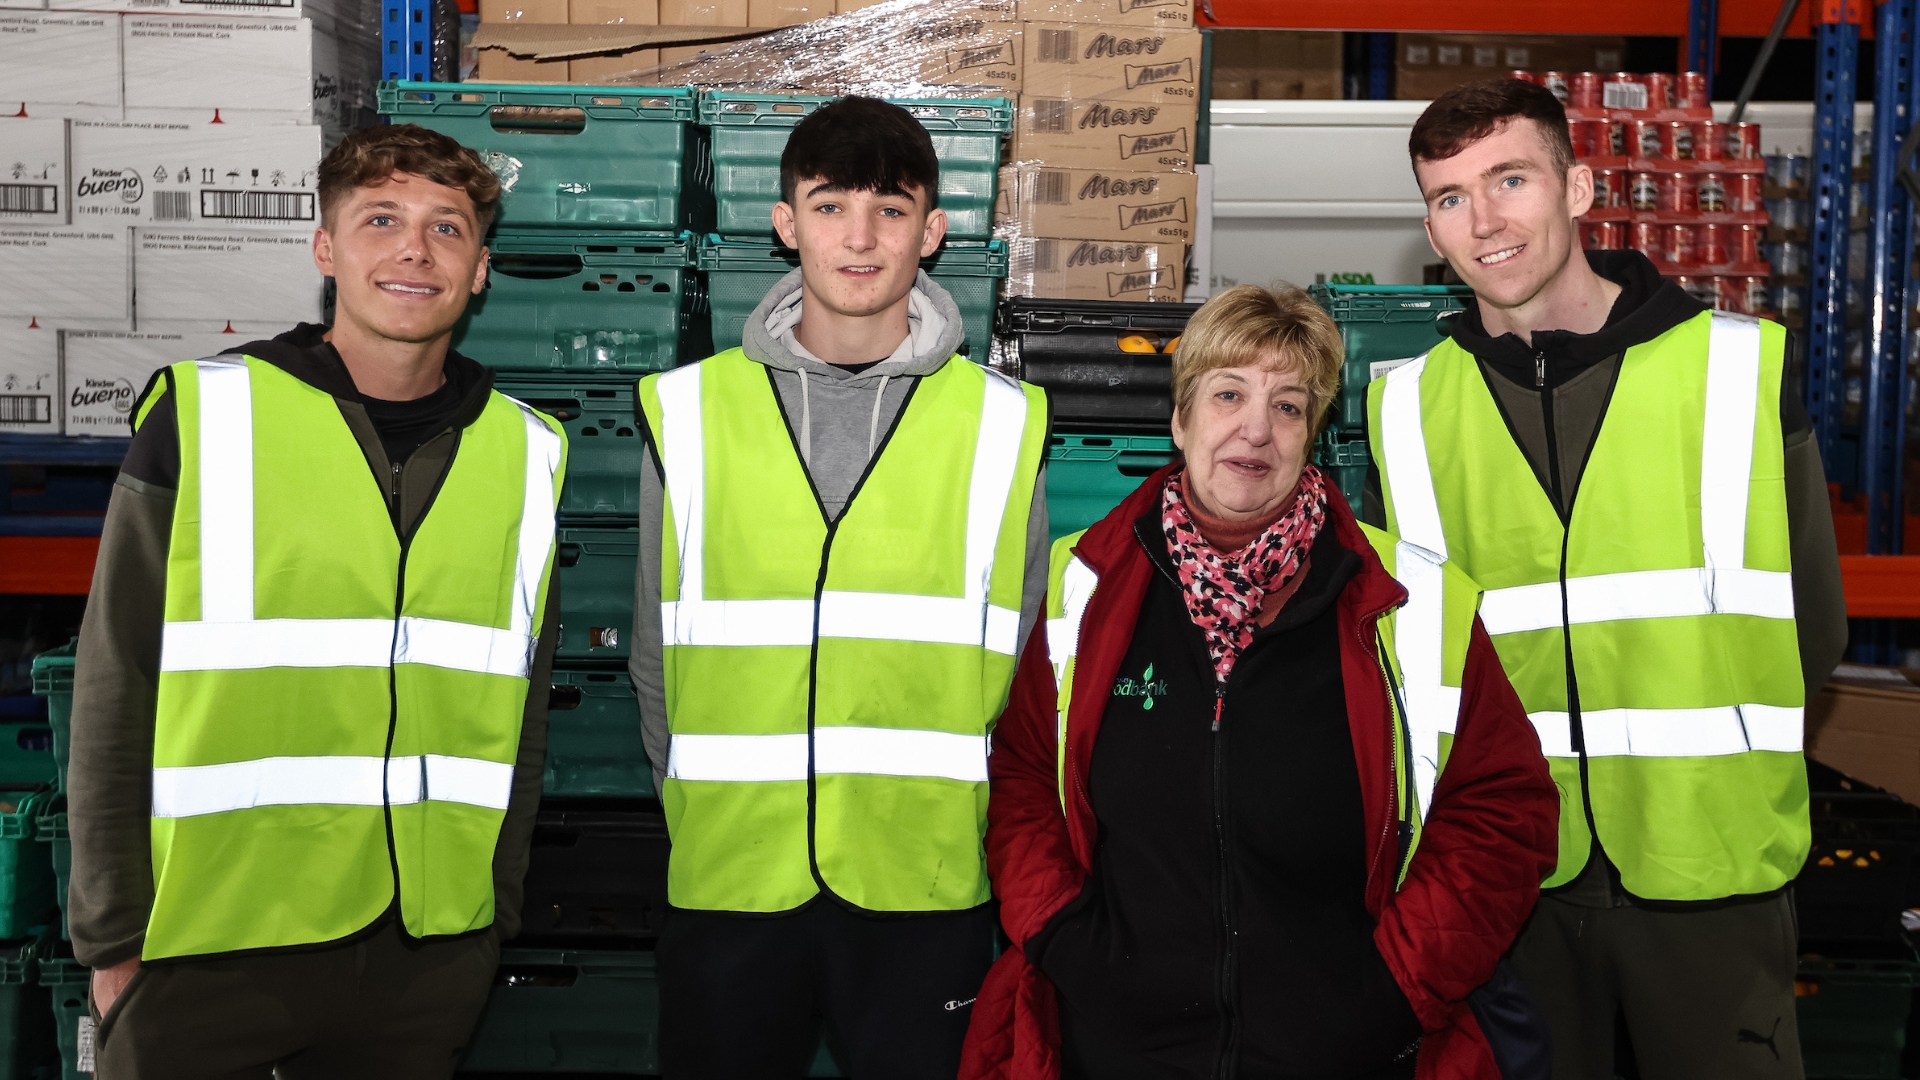 Barnsley FC Players visit Barnsley Foodbank in support of Reds against Hunger campaign and urge fans to back donation drive taking place at Barnsley FC’s game against Reading. 